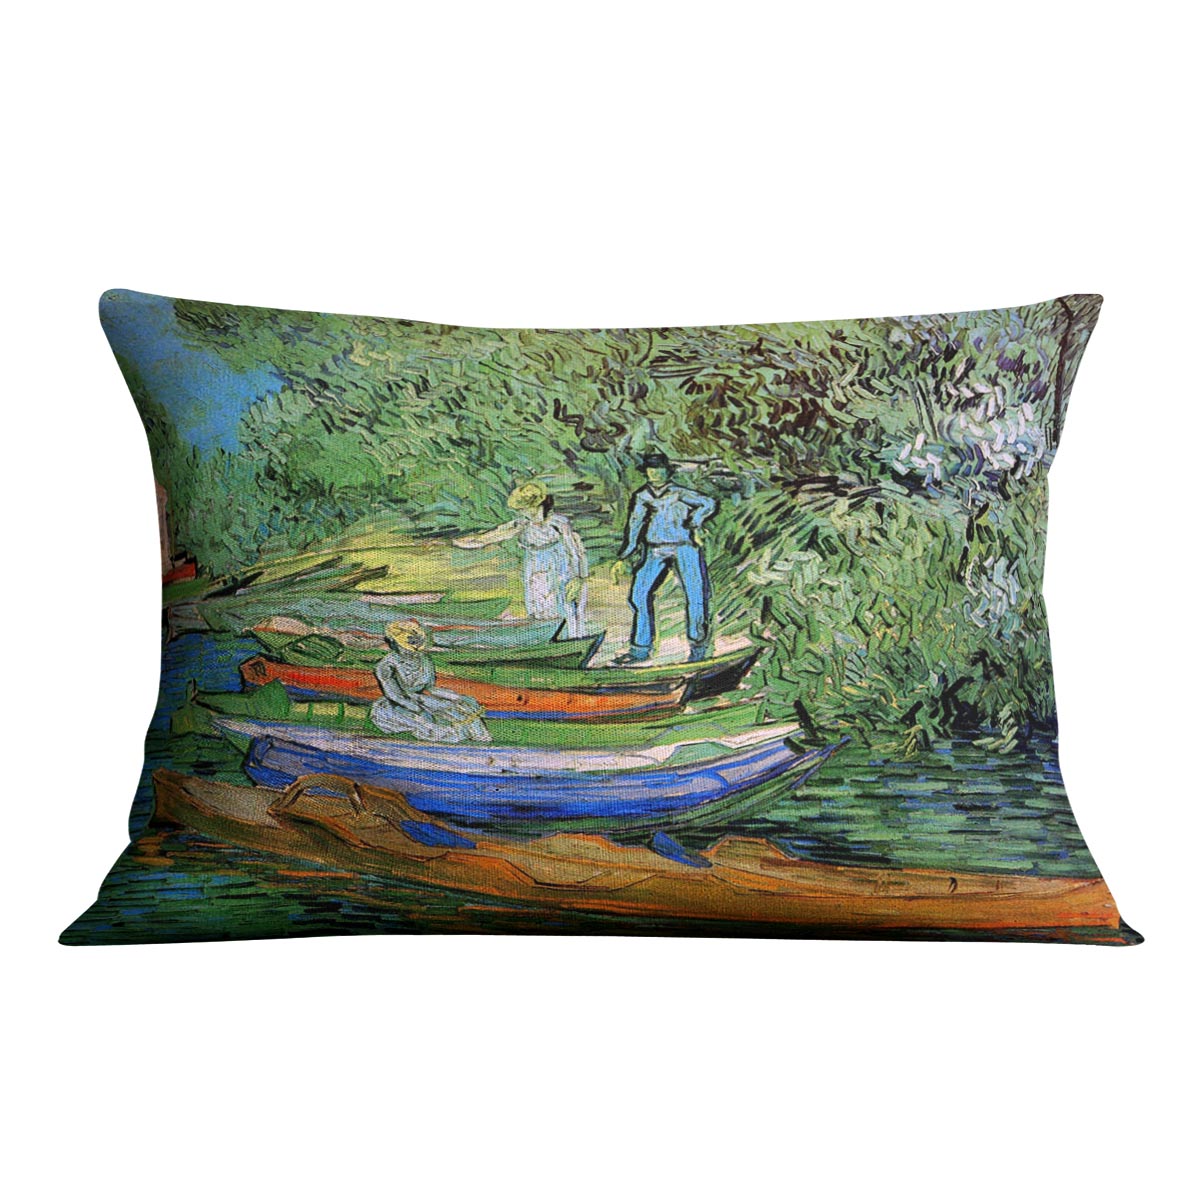 Bank of the Oise at Auvers by Van Gogh Cushion